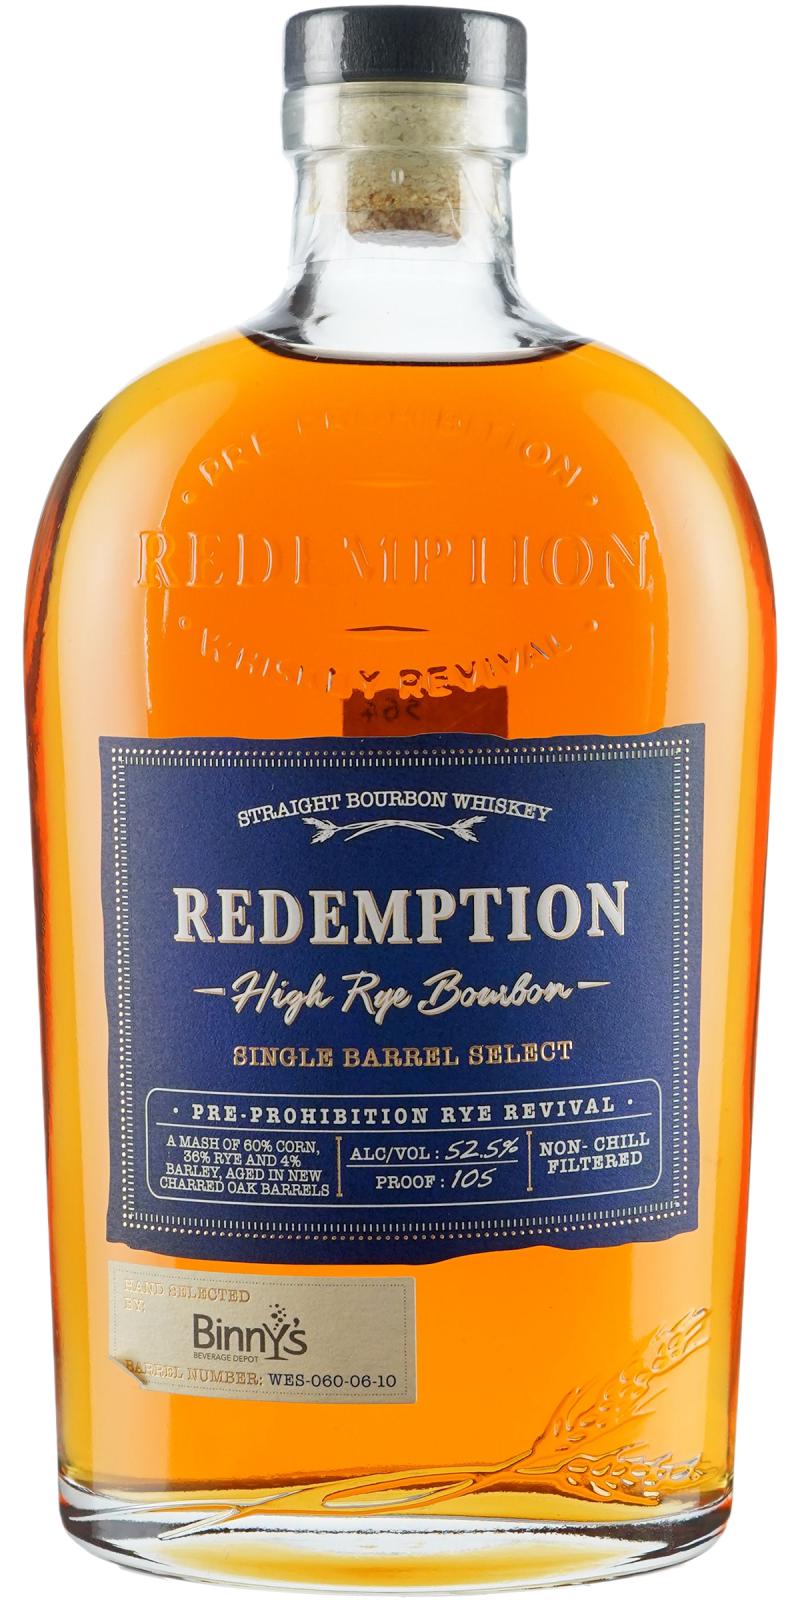 Redemption High Rye Bourbon Ratings and reviews Whiskybase